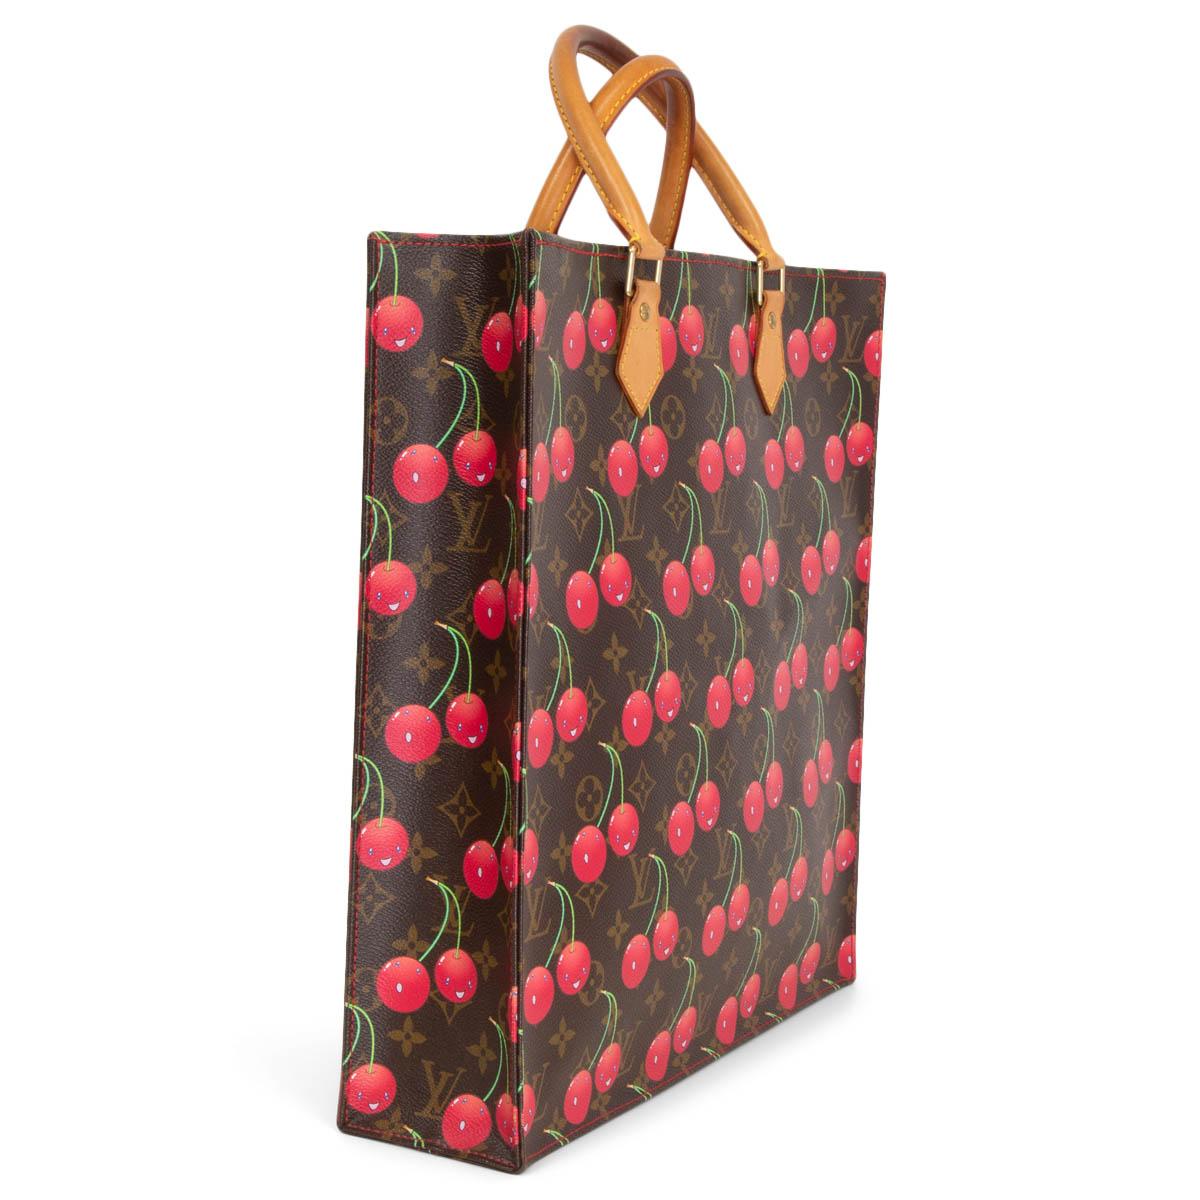 100% authentic Louis Vuitton x Takashi Murakami 2005 Sac Plat Tote in brown Monogram Cerises canvas with a cherry-print by artist Takashi Murakami. This tall tote features vachetta leather cowhide rolled top handles with brass links. The top is open